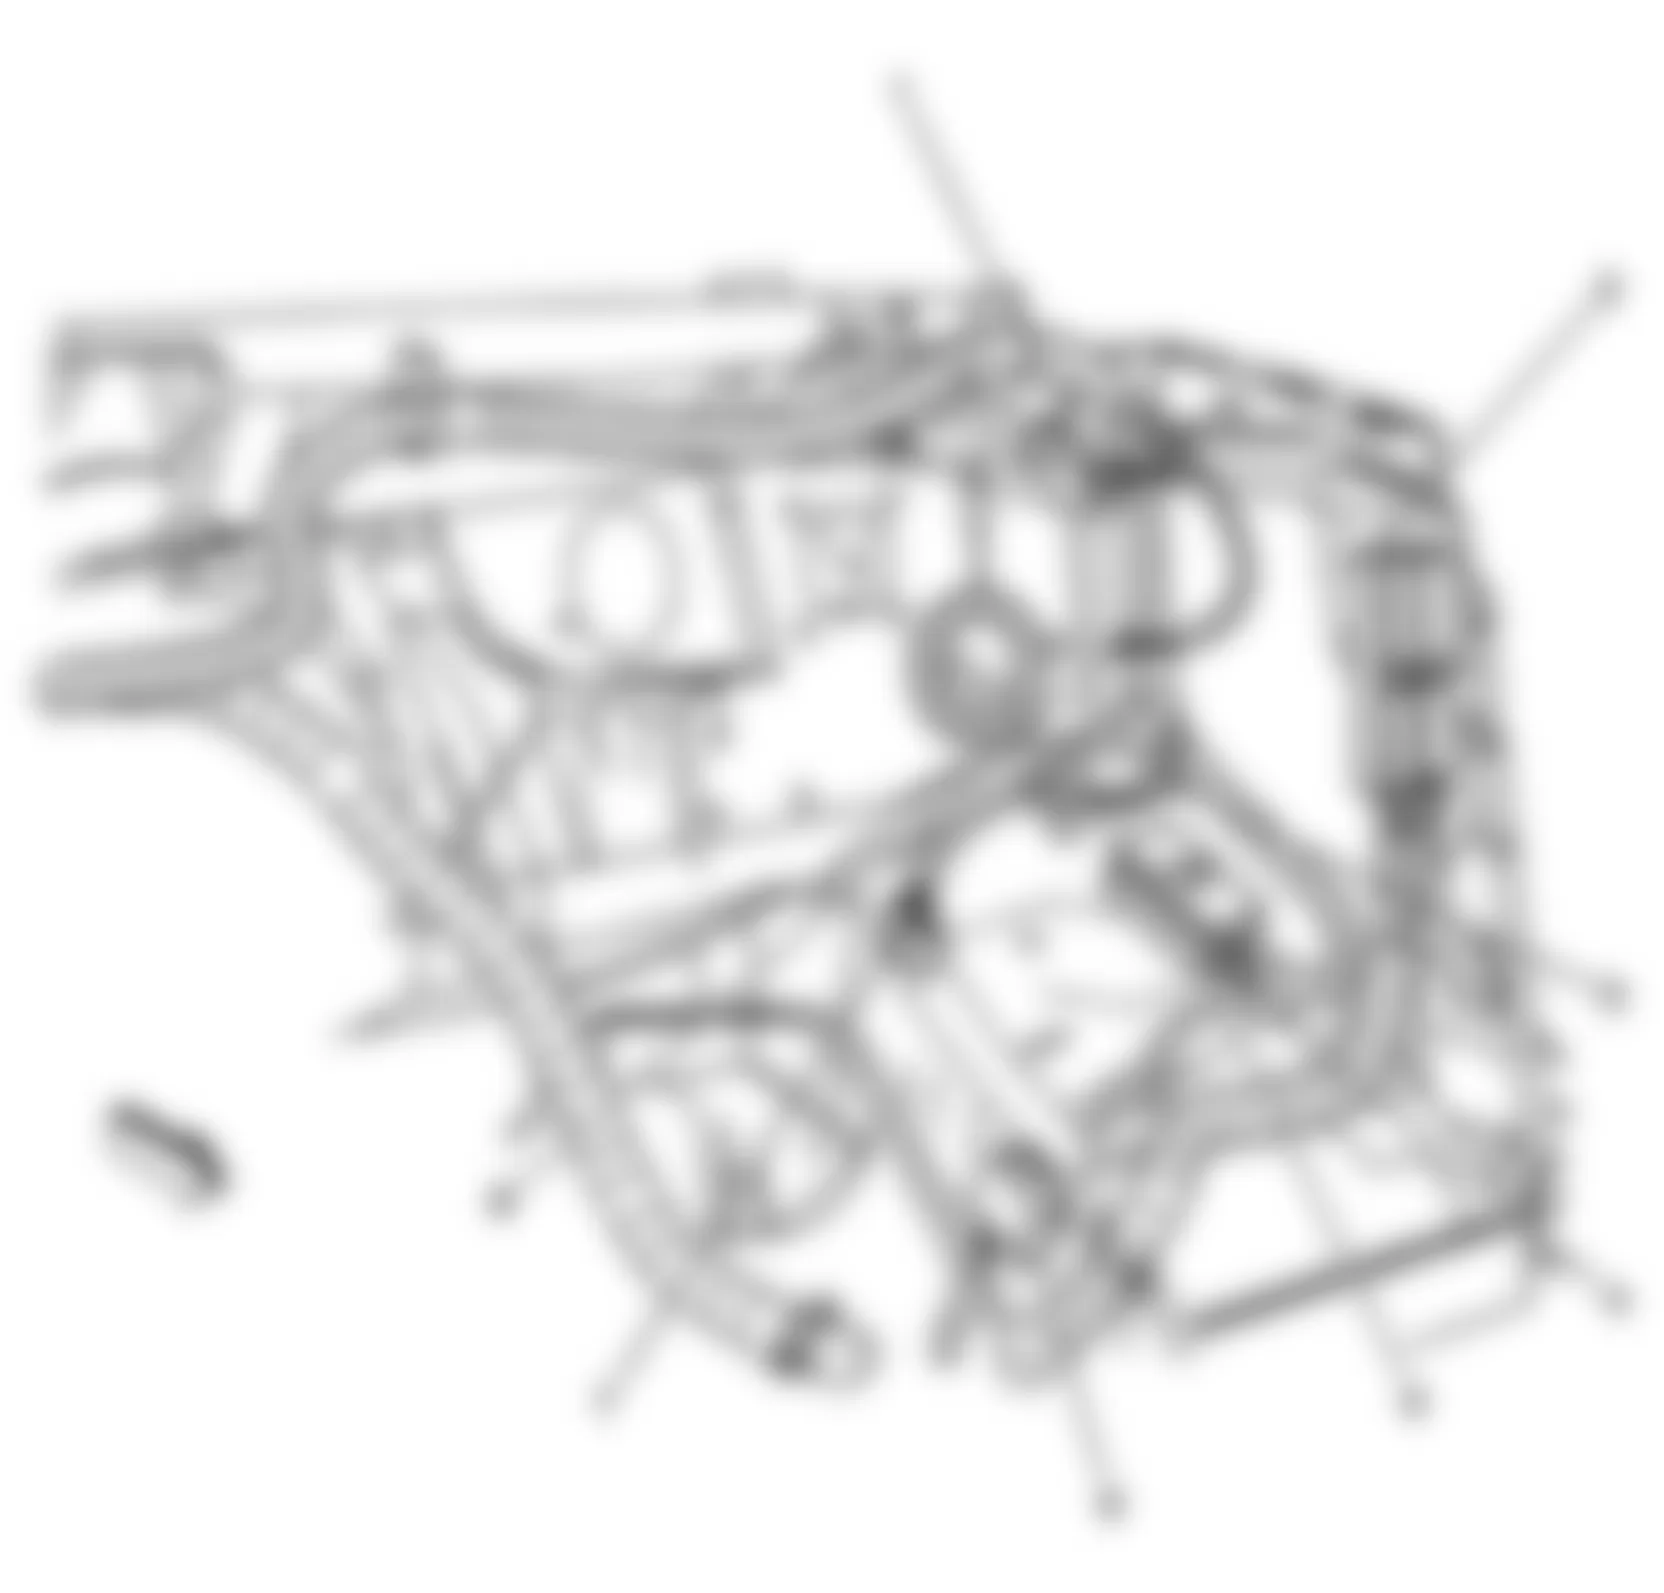 GMC Savana G2500 2010 - Component Locations -  Left Rear Of Engine Compartment